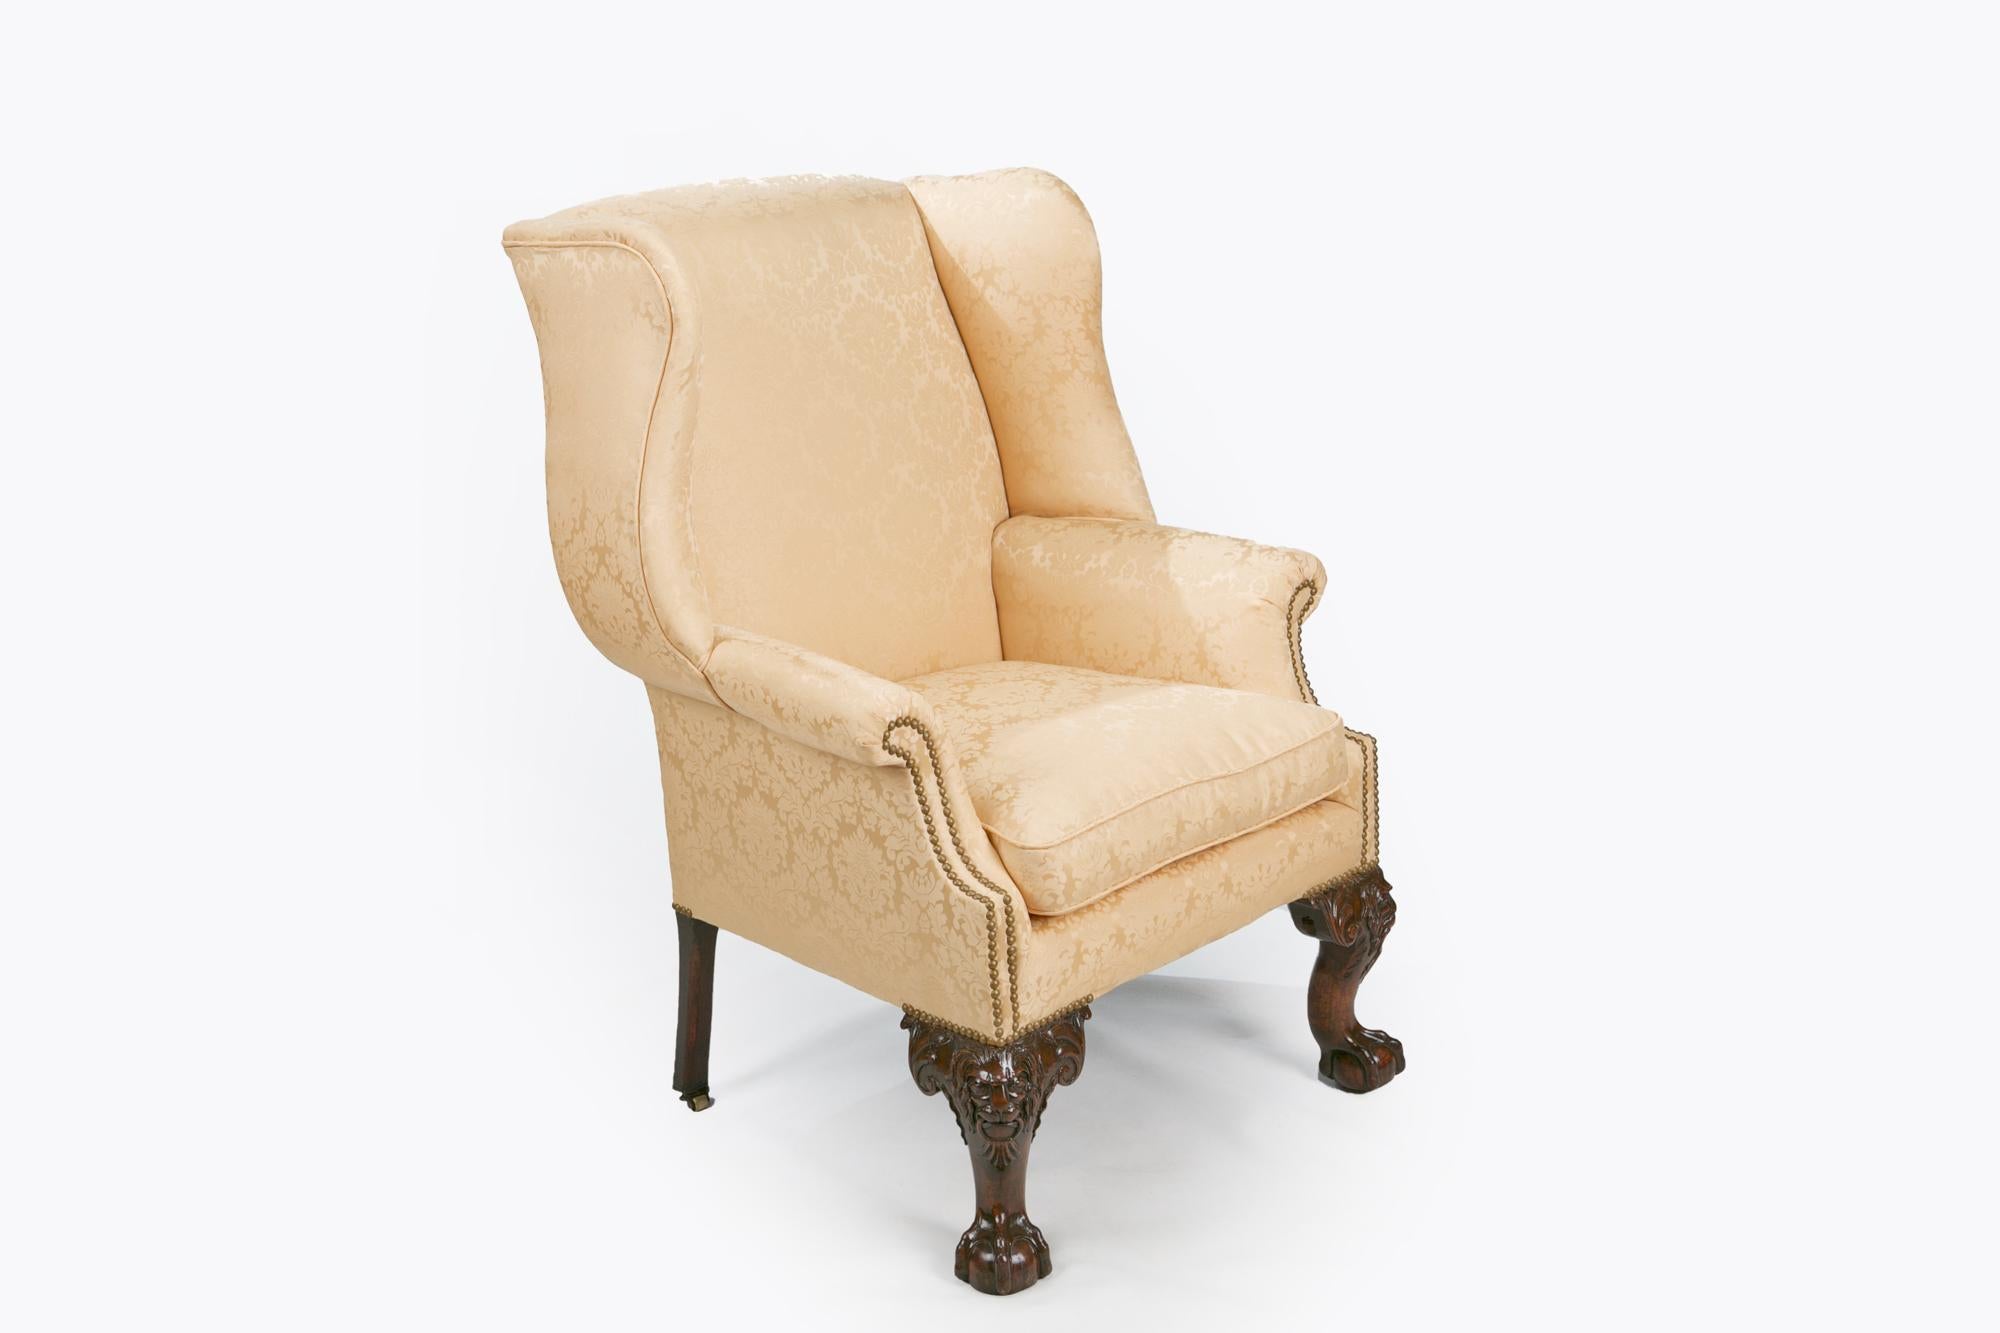 18th century George III wing chair, the straight back with outscrolled wings raised over outscrolling arms raised above hipped cabriole leg with lion mask on knee flanked with scrolling foliate carved in high relief terminating on ball and claw foot.